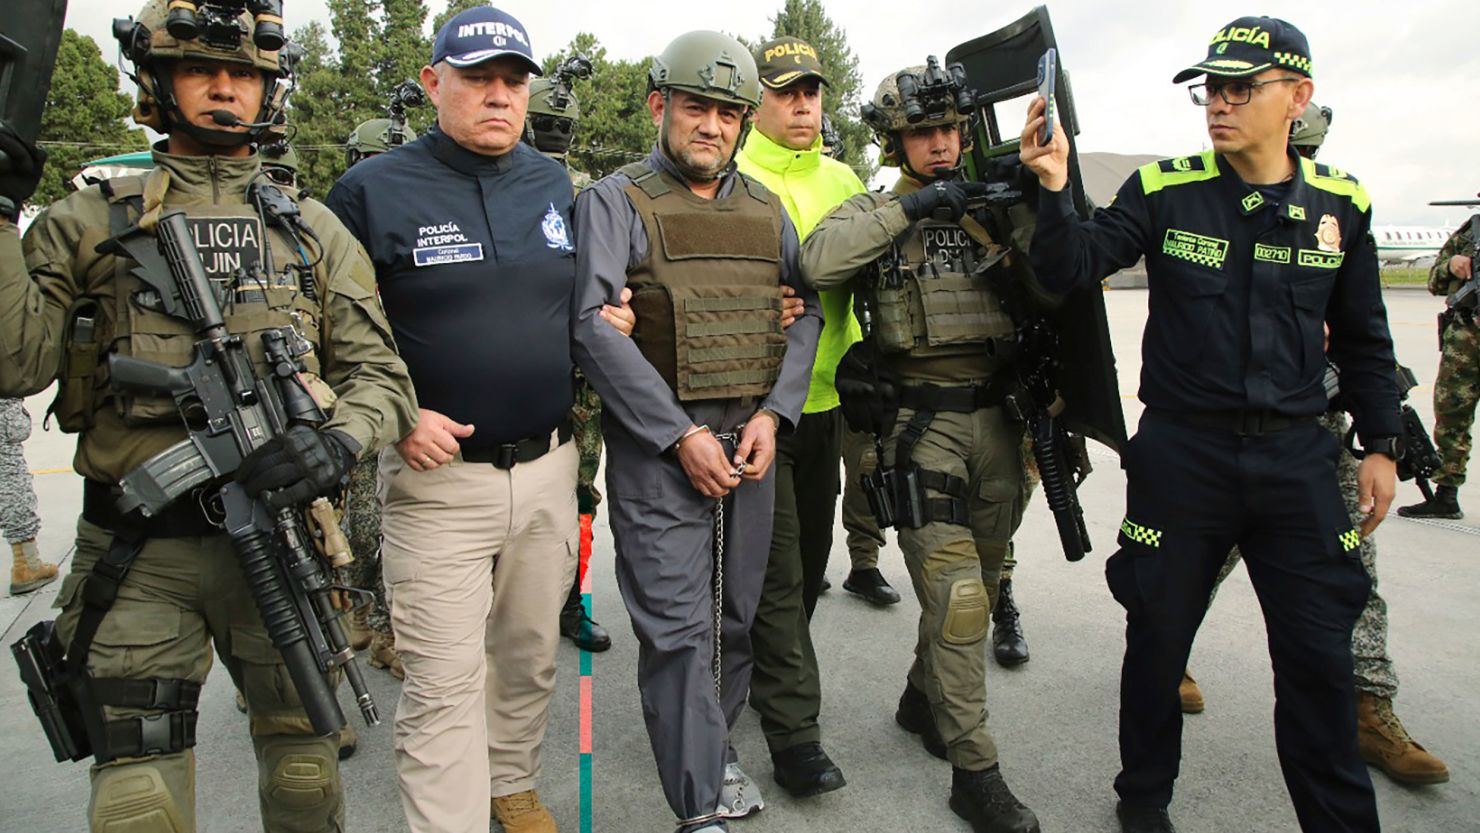 Police escort Dairo Antonio Usuga, center, also known as "Otoniel," at an airport in Colombia before his extradition to the US